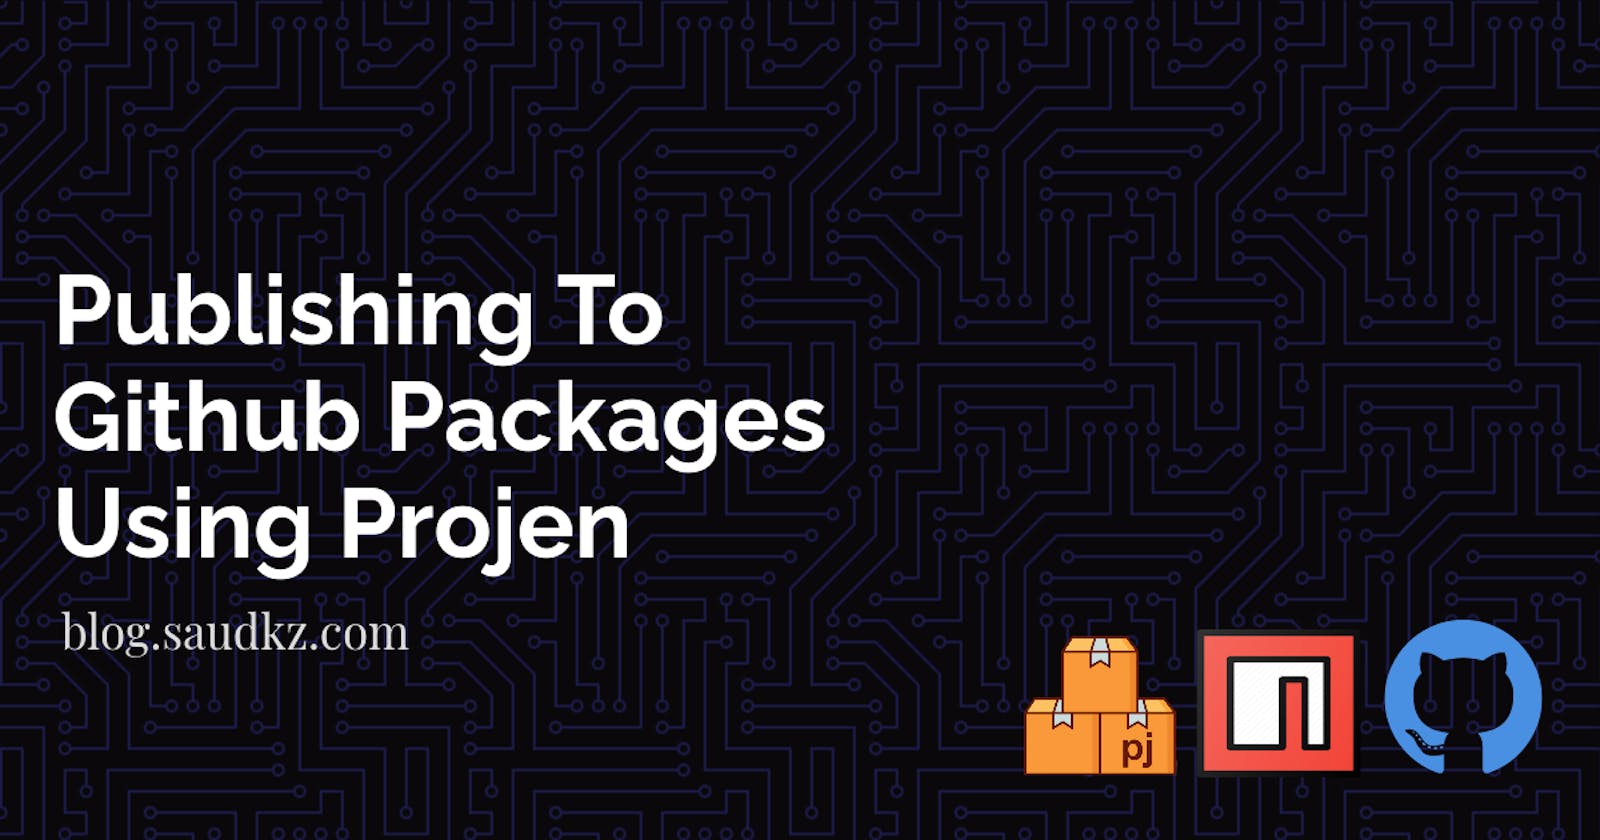 Publishing to Github packages using Projen